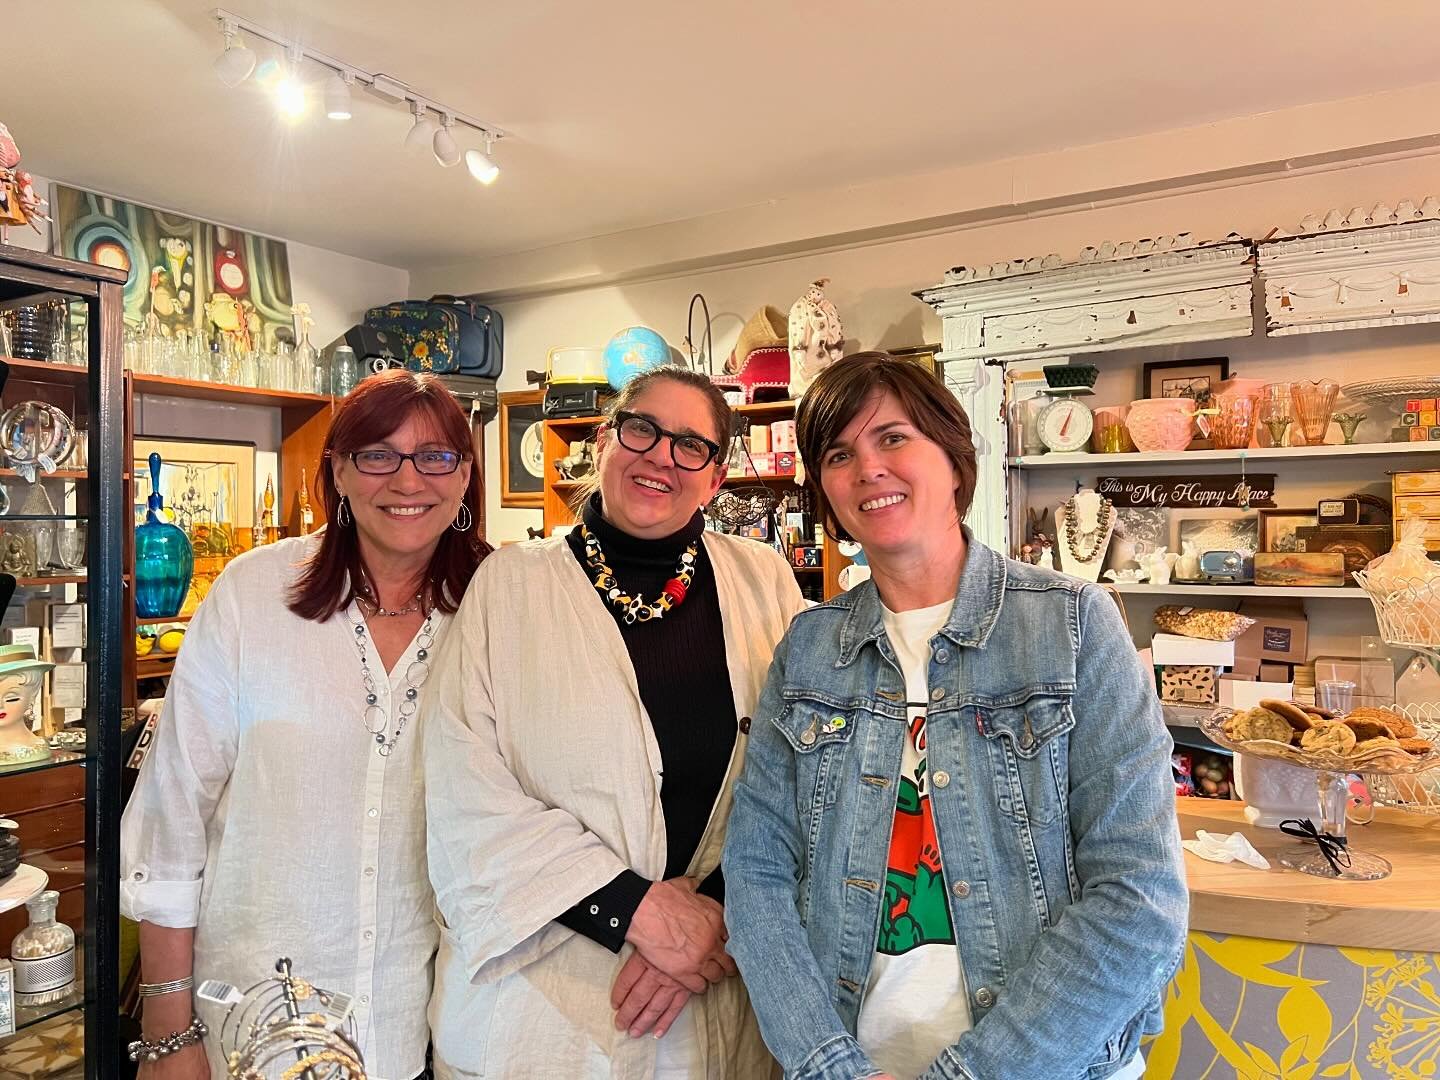 A very happy Mother&rsquo;s Day to everyone, especially these 2 amazing Moms Merri and Sam who add sunshine and smiles to The Cottage. So blessed to have these wonderful woman be part of The Cottage team. Oh and we are open today 10-5. I will have a 